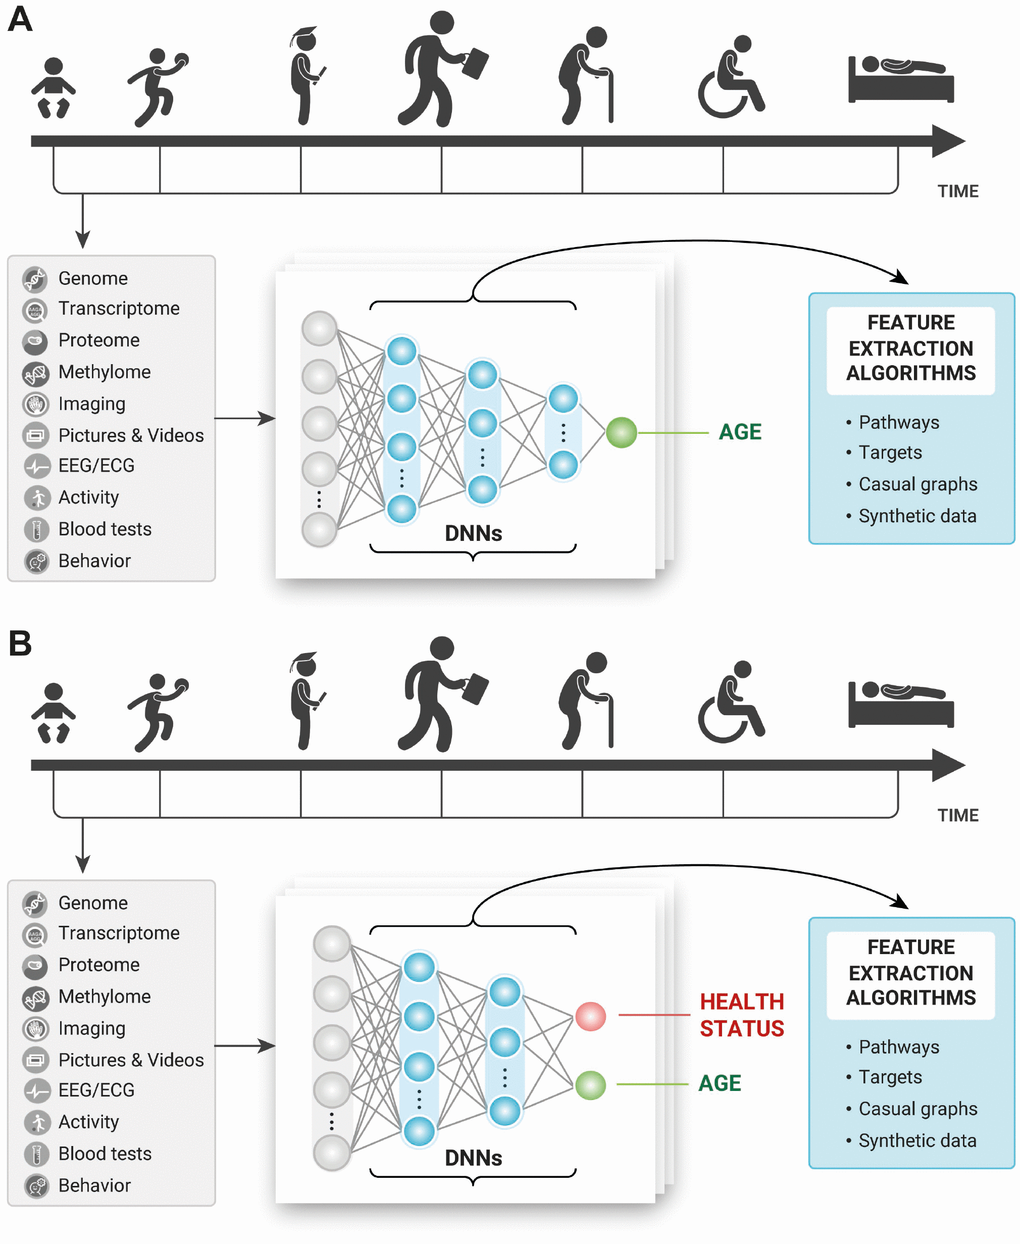 Training the deep neural networks on multimodal longitudinal data to predict (A) age of the individual and (B) age and health status of the individual and using the feature importance and selection approaches to infer causal relationships, pathways, and targets.